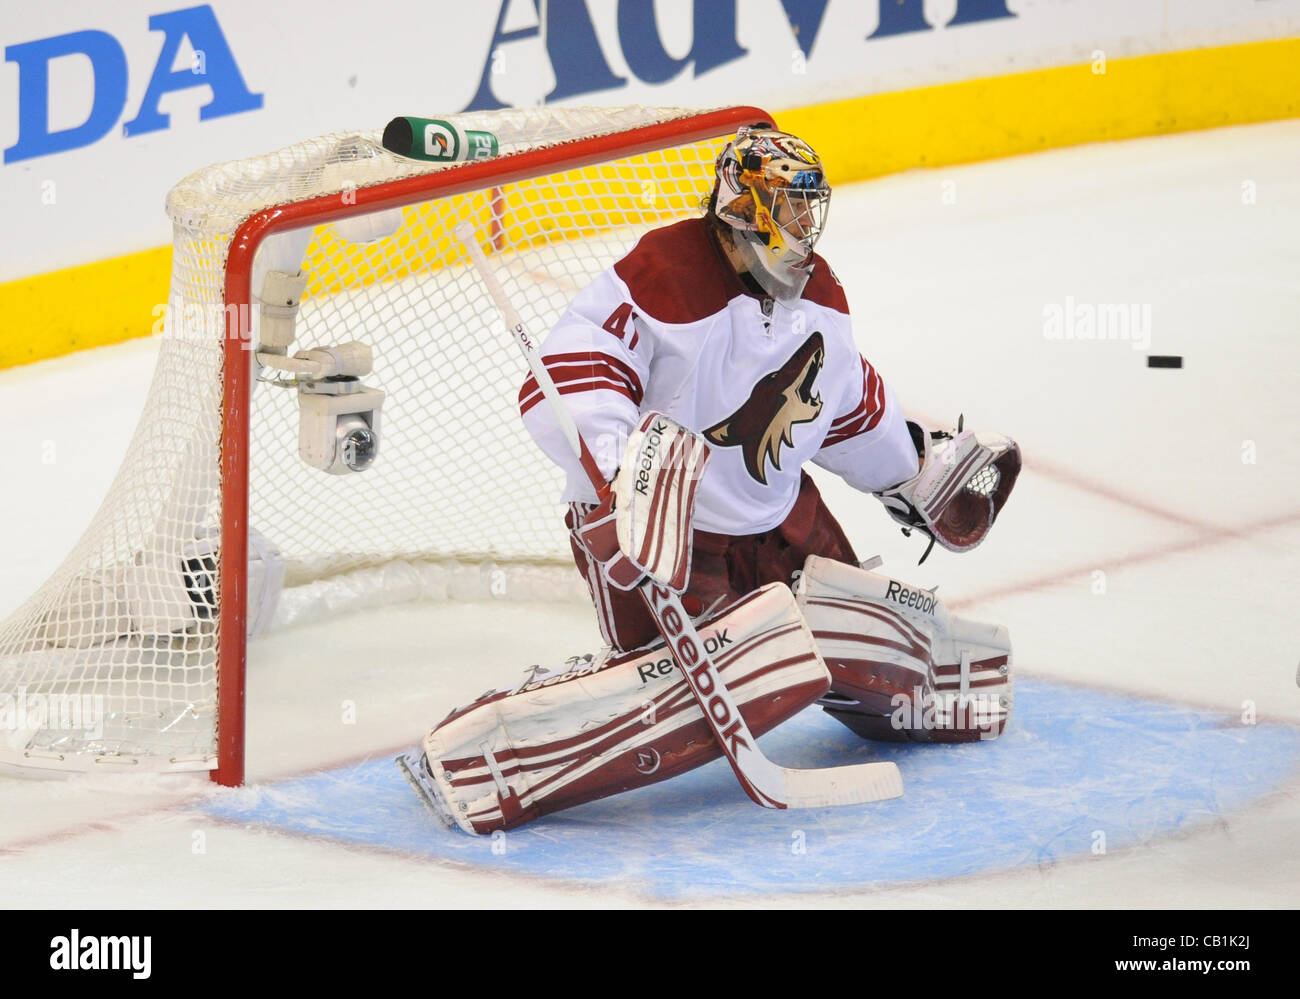 Arizona Coyotes' Mike Smith Named To NHL All-Star Game